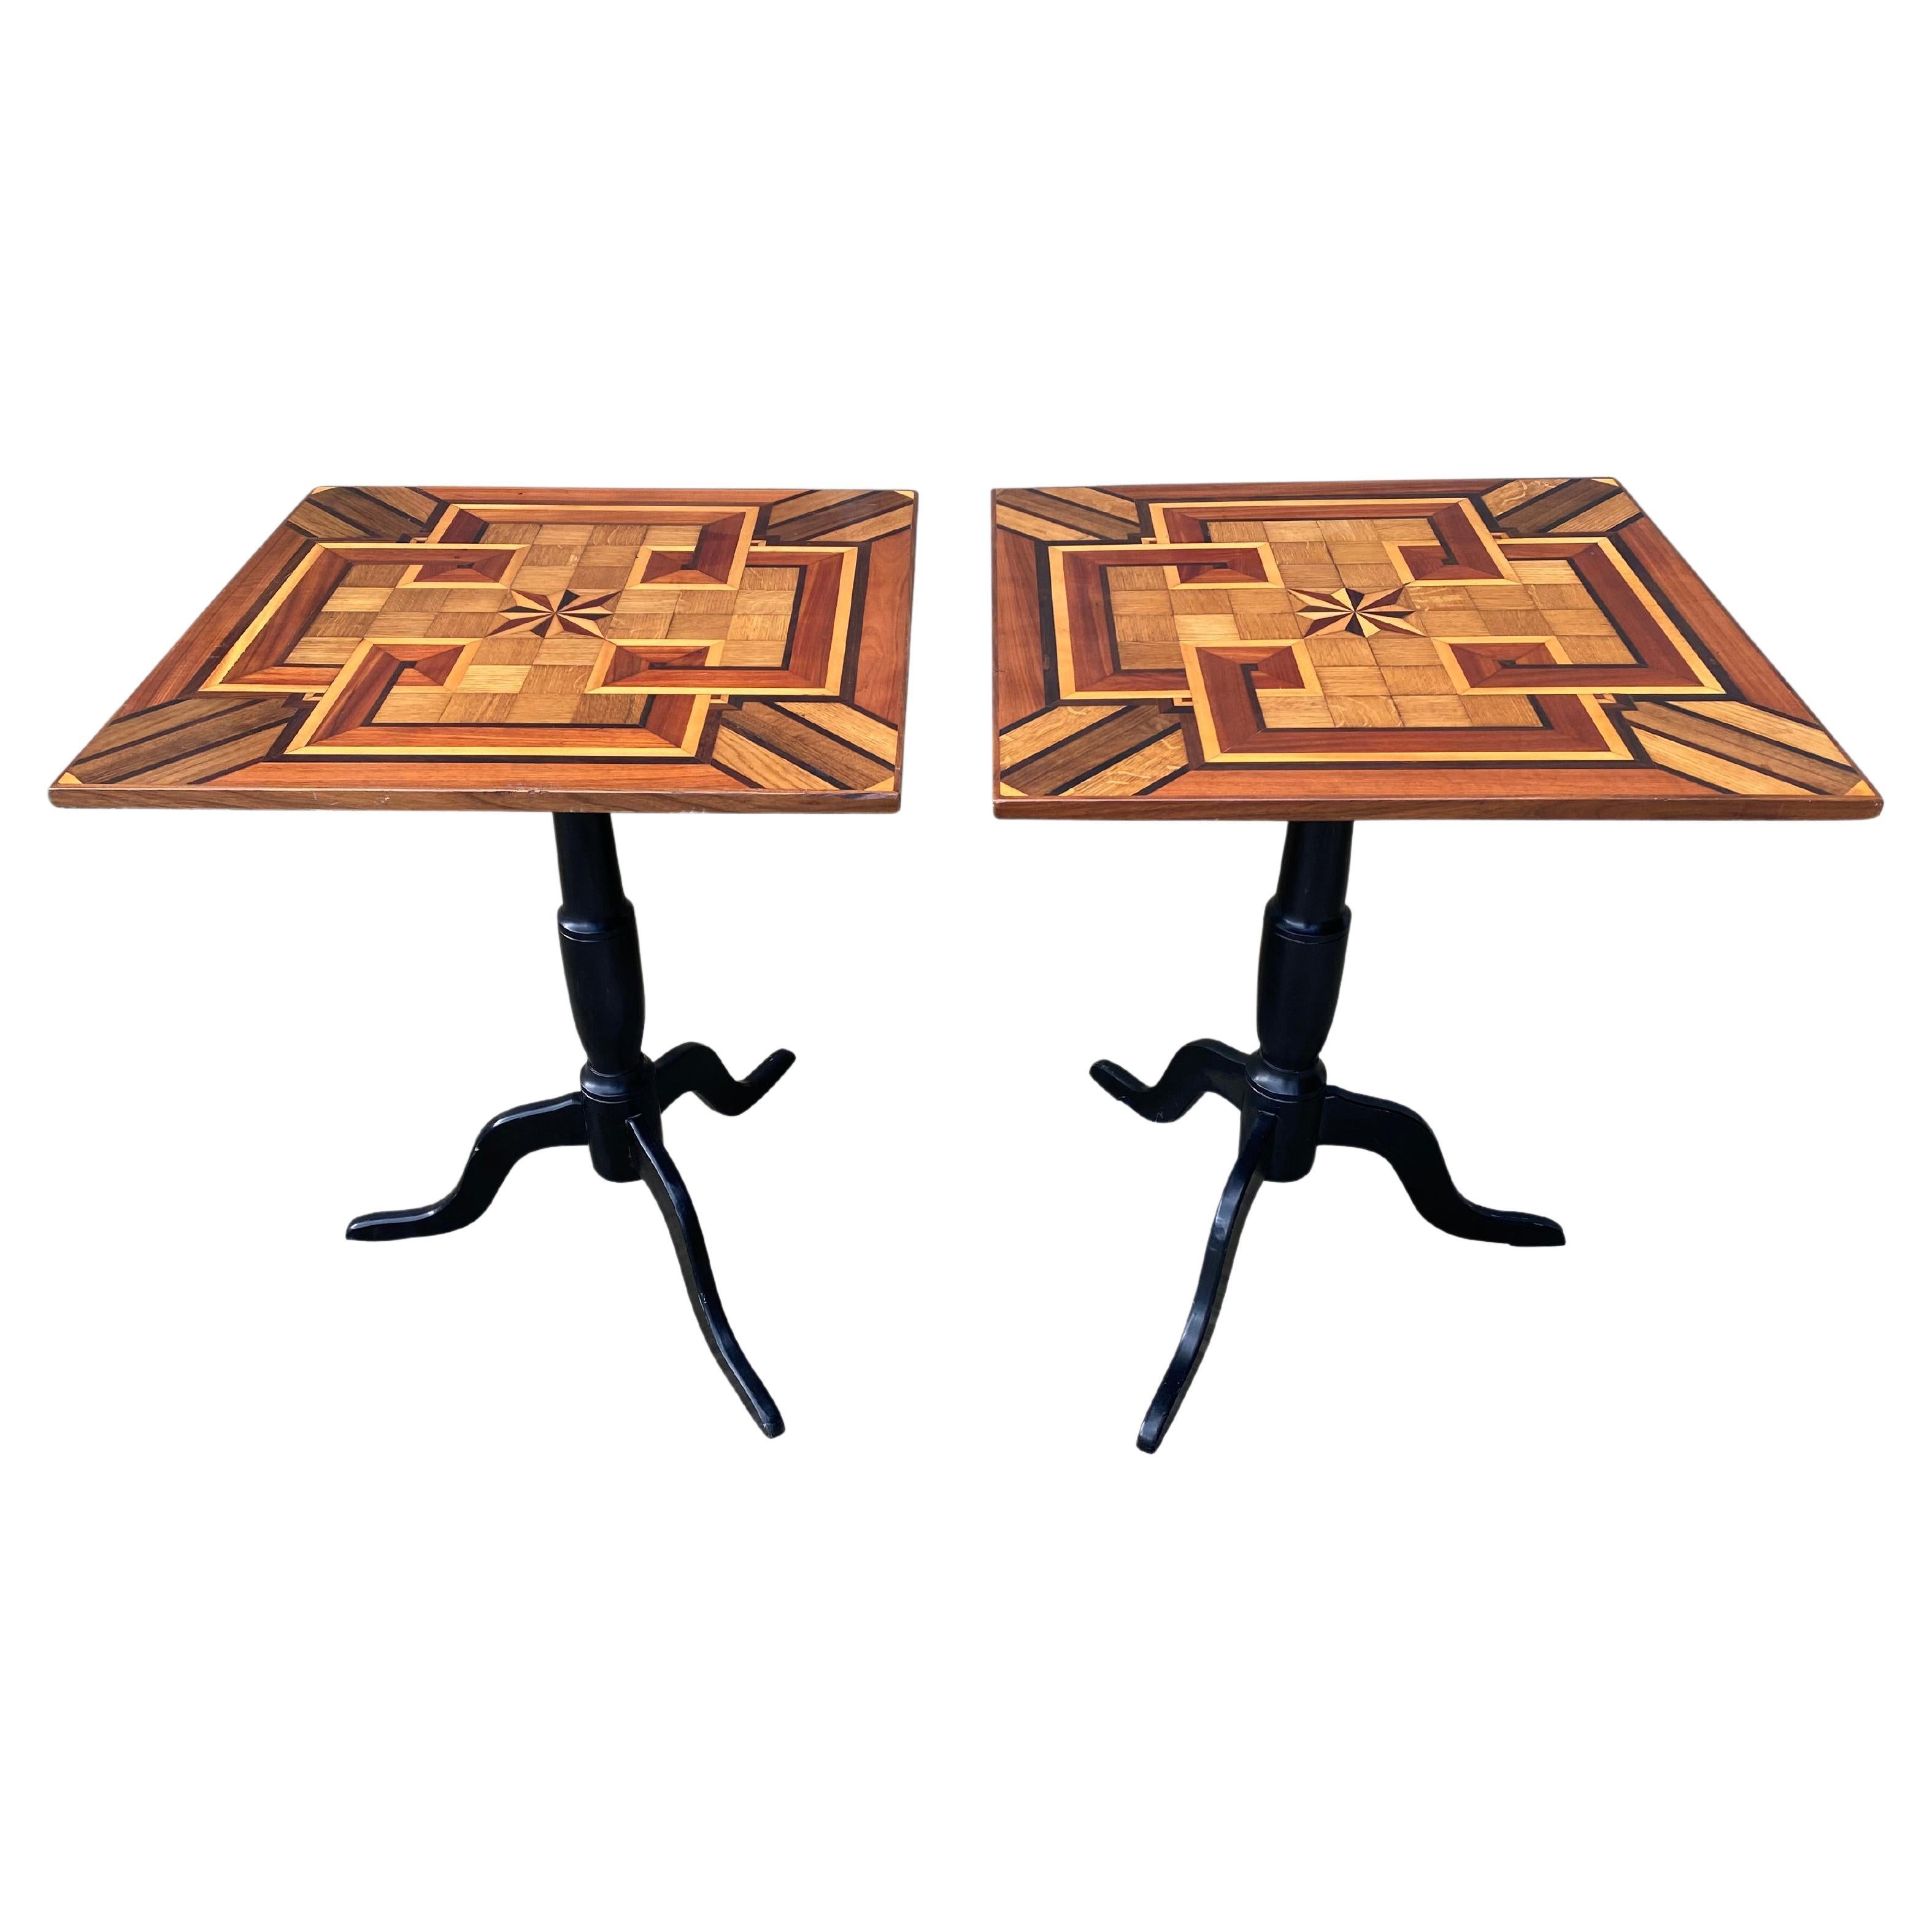 Pair of 19th Century Geometric Inlay & Marquetry Side Tables For Sale